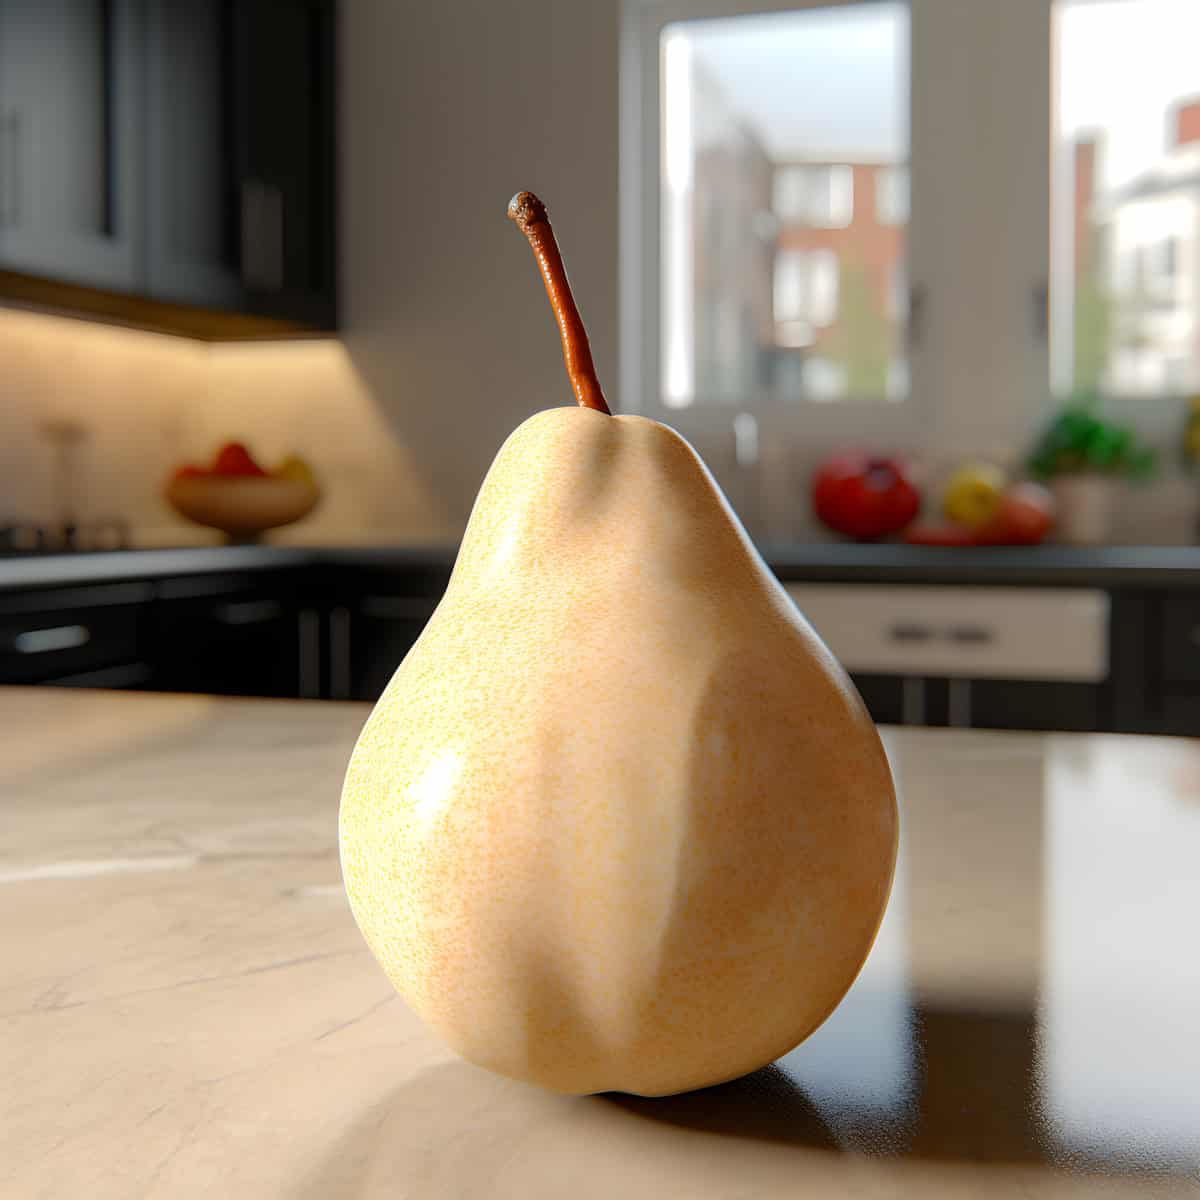 Chinese White Pear on a kitchen counter